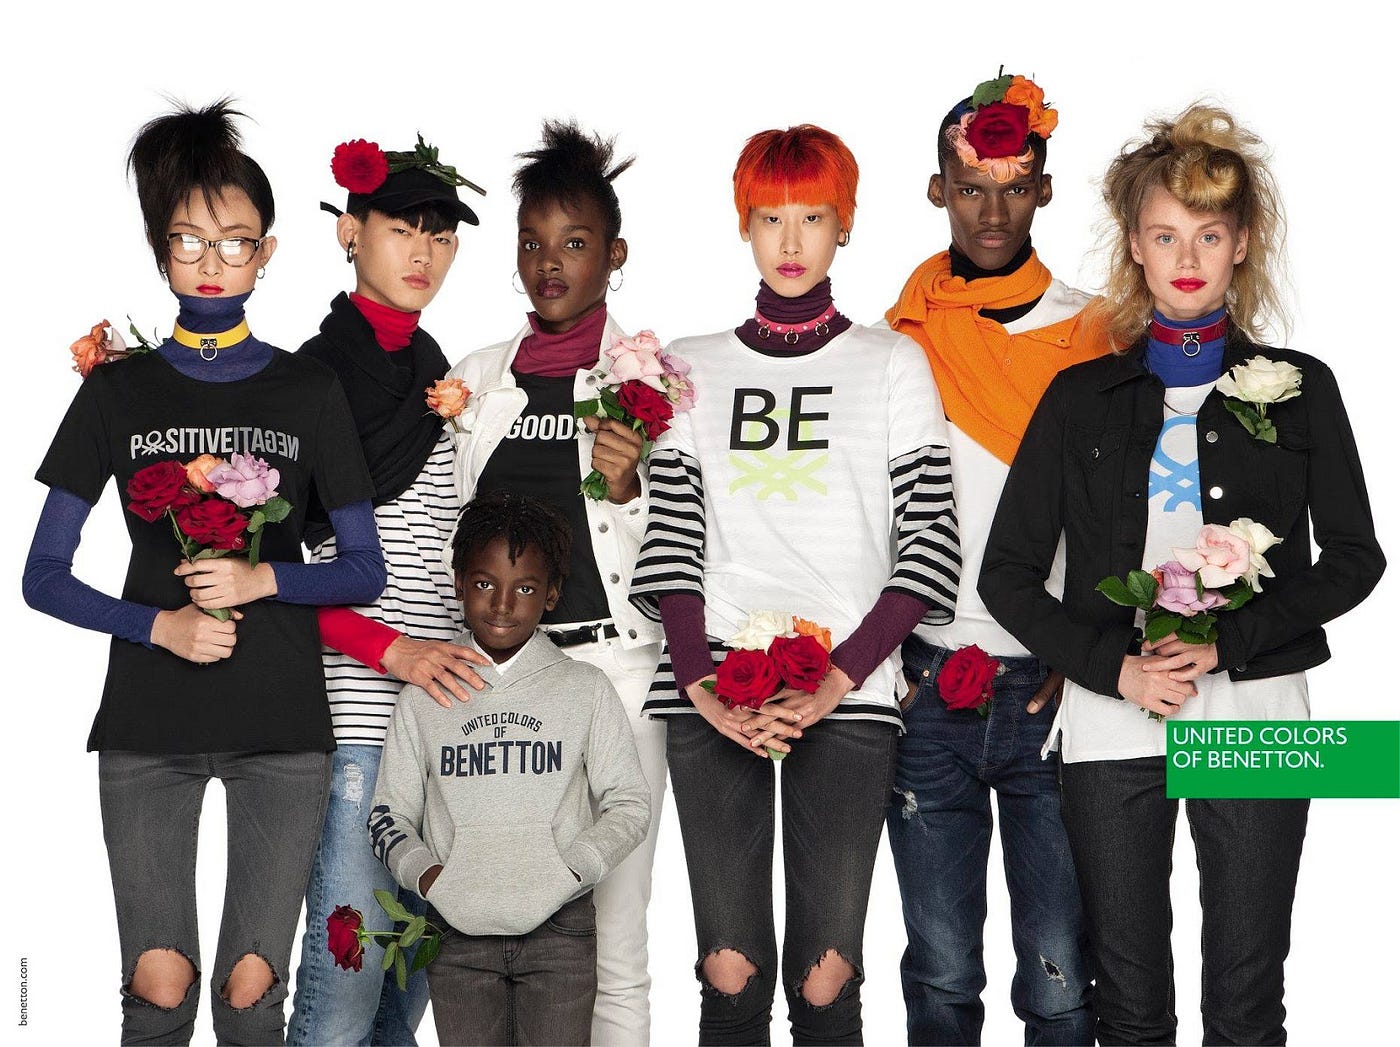 United Colors of Benetton blazed a trail for diversity in fashion